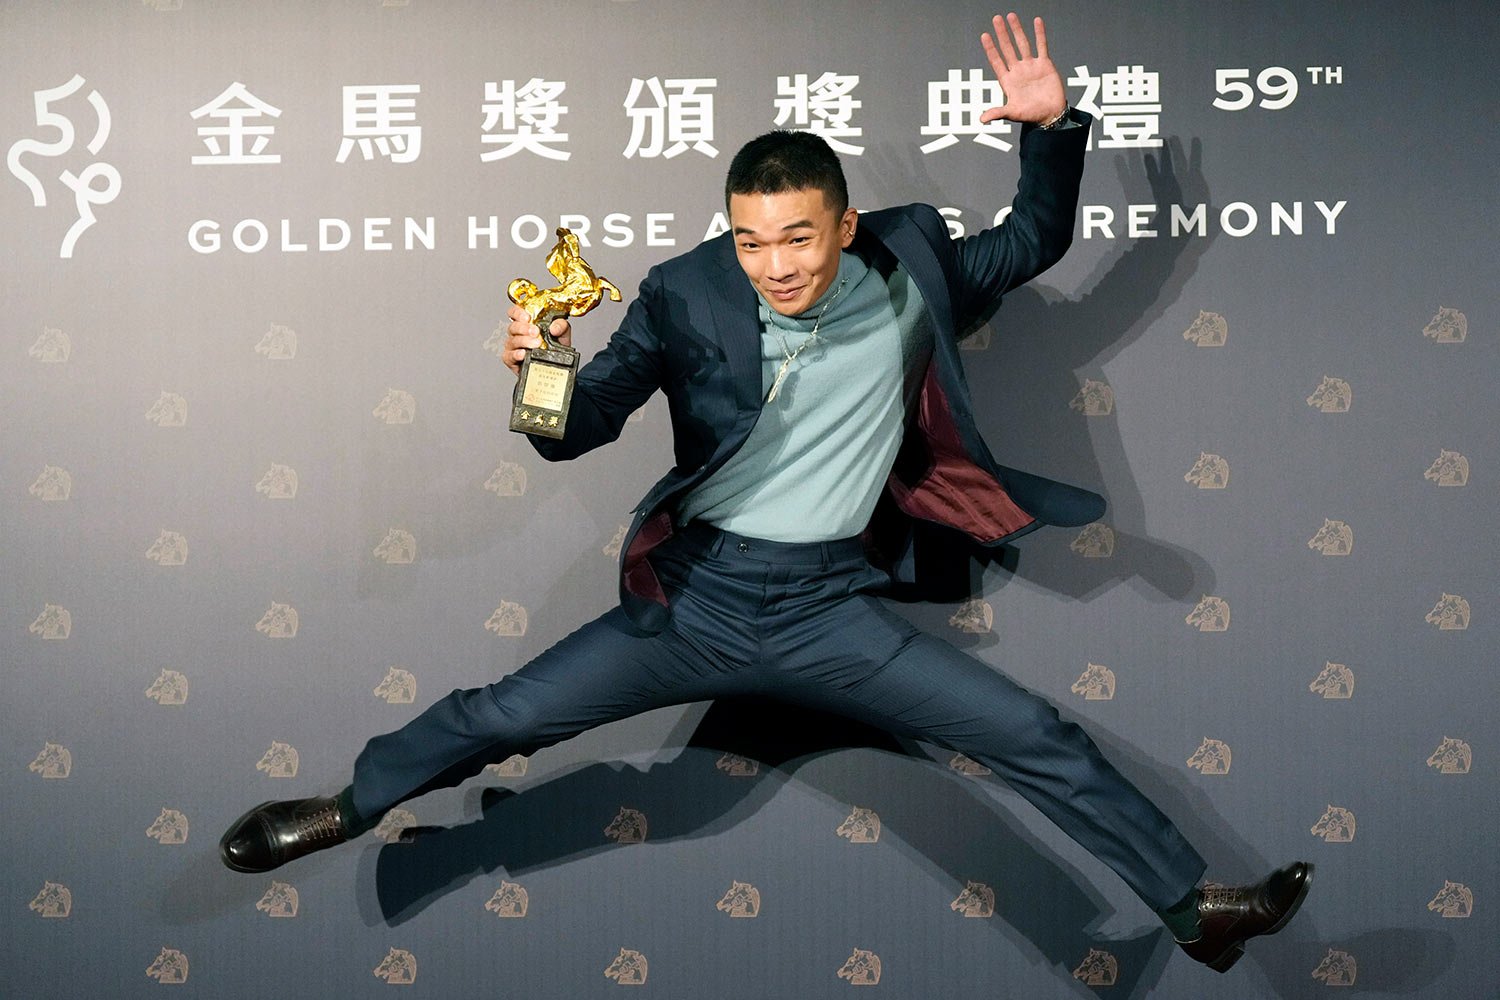  Taiwanese actor Hu Jhih-ciang jumps with his award for Best New Performer at the 59th Golden Horse Awards in Taipei, Taiwan, Saturday, Nov. 19, 2022.  (AP Photo/Billy Dai) 